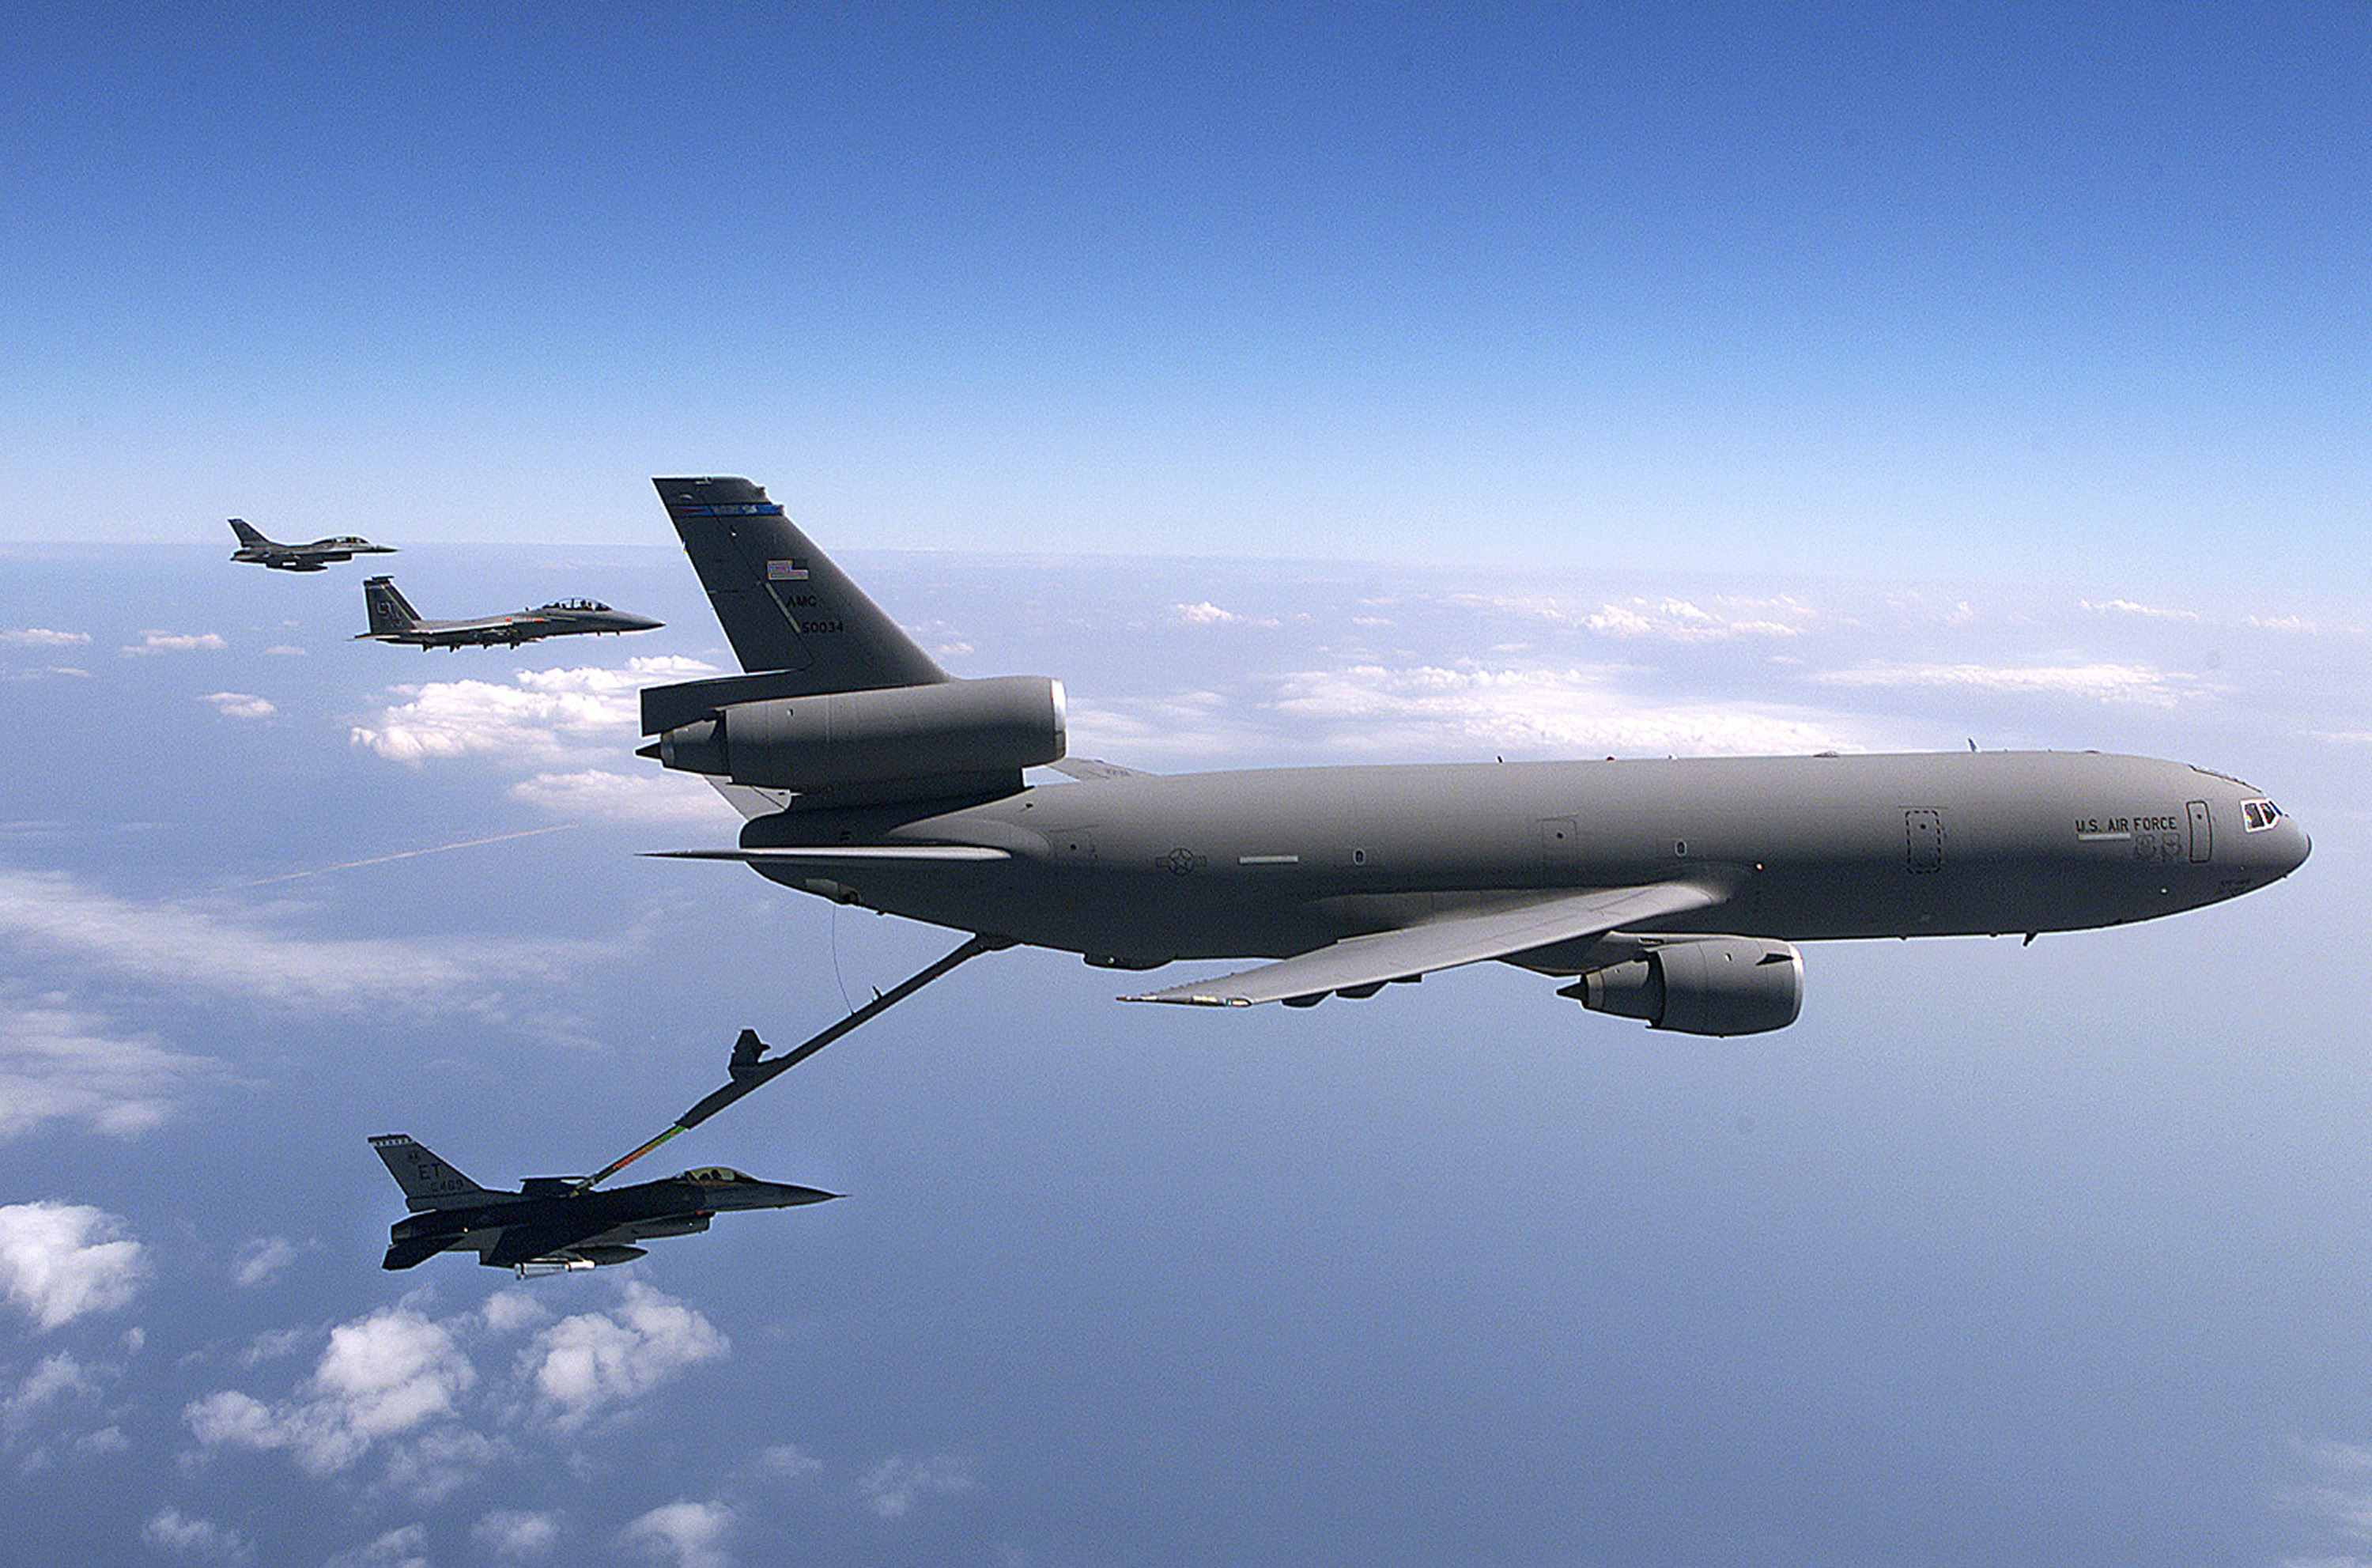 Air force refueling aircraft